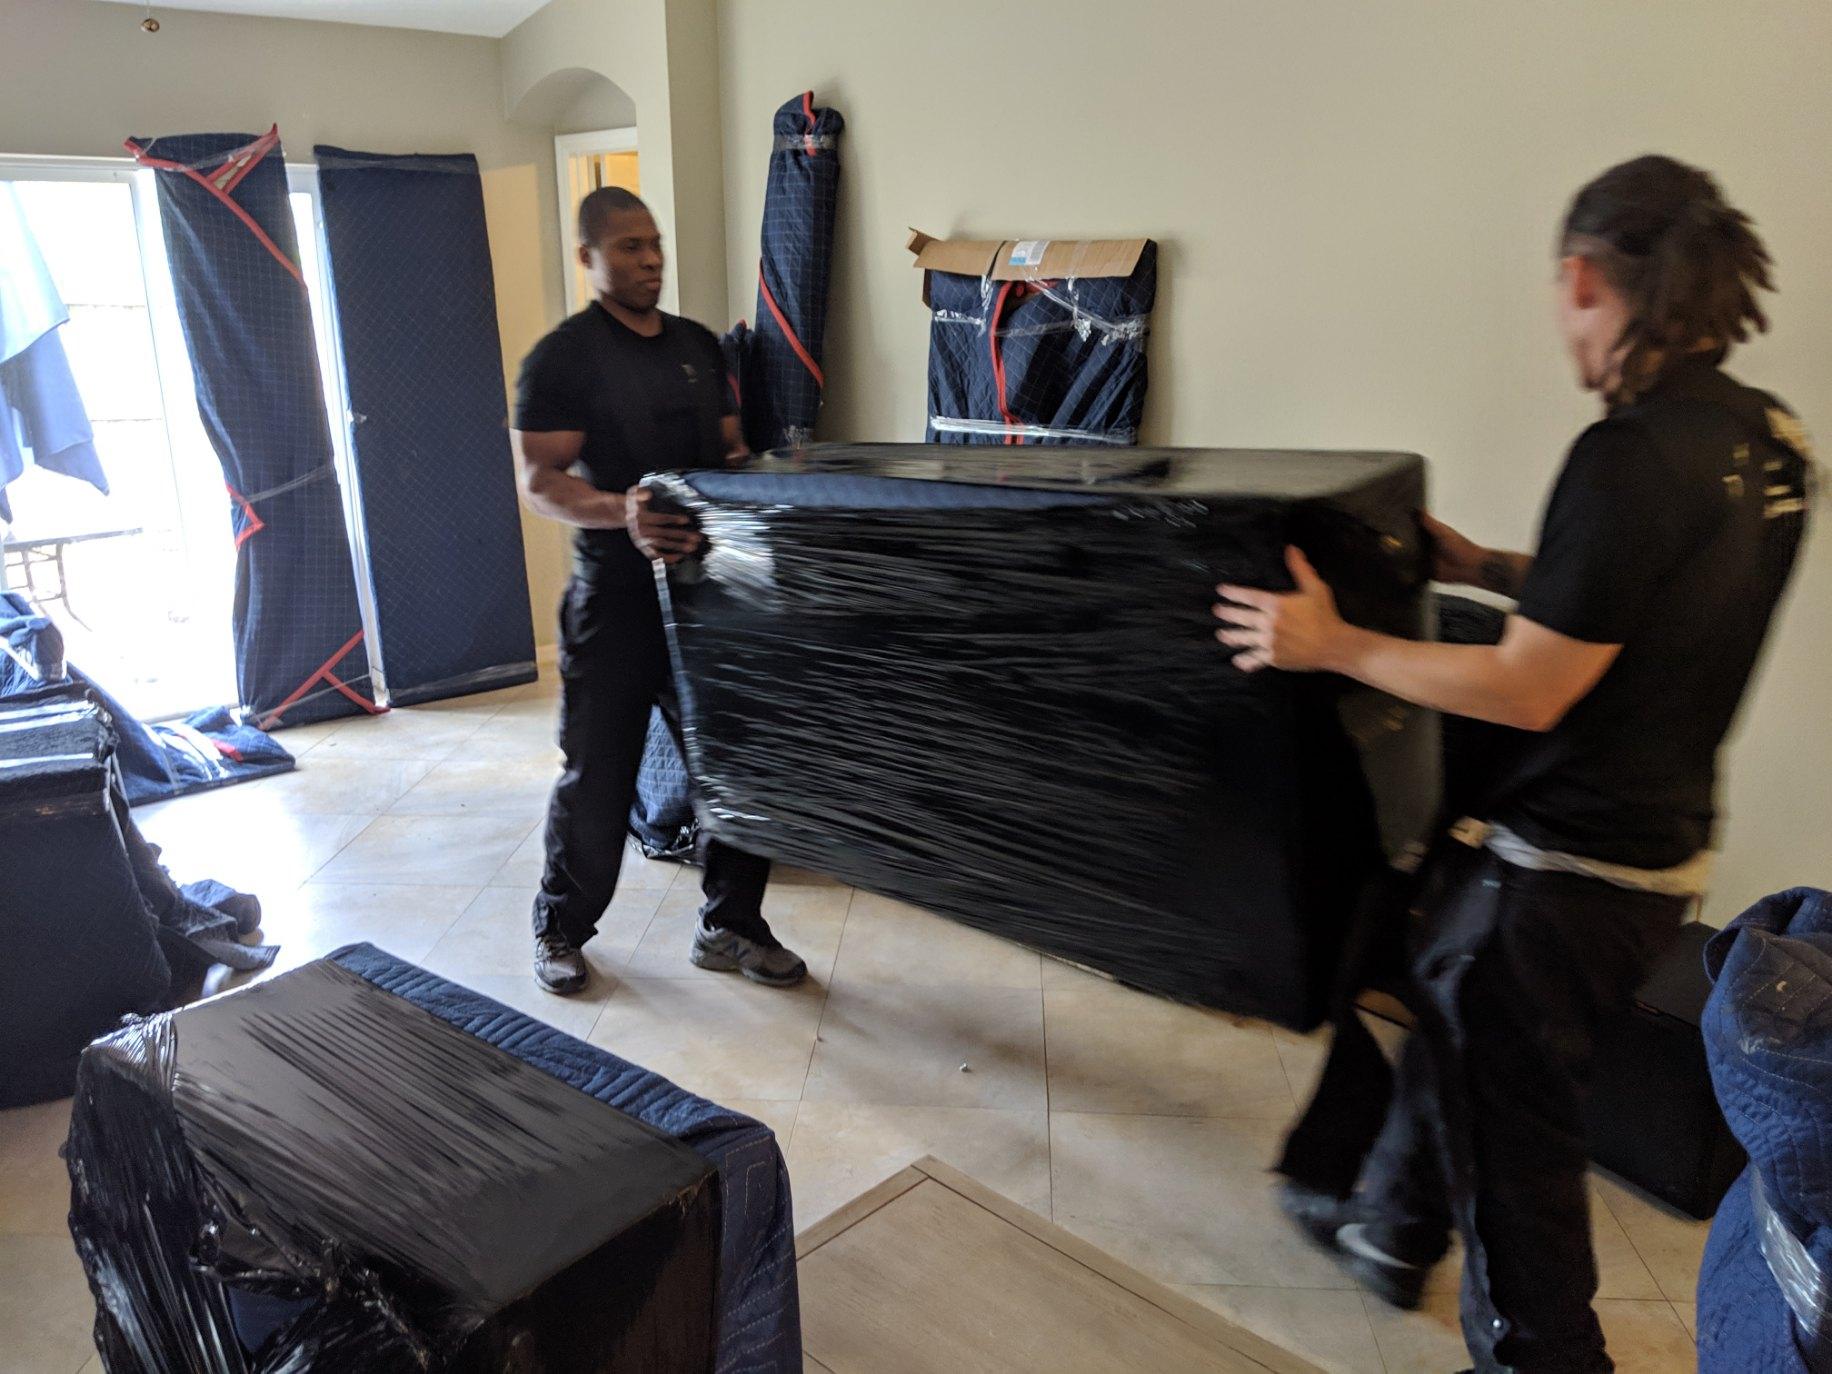 Experienced Hot Tub Movers Servicing Dade City, FL